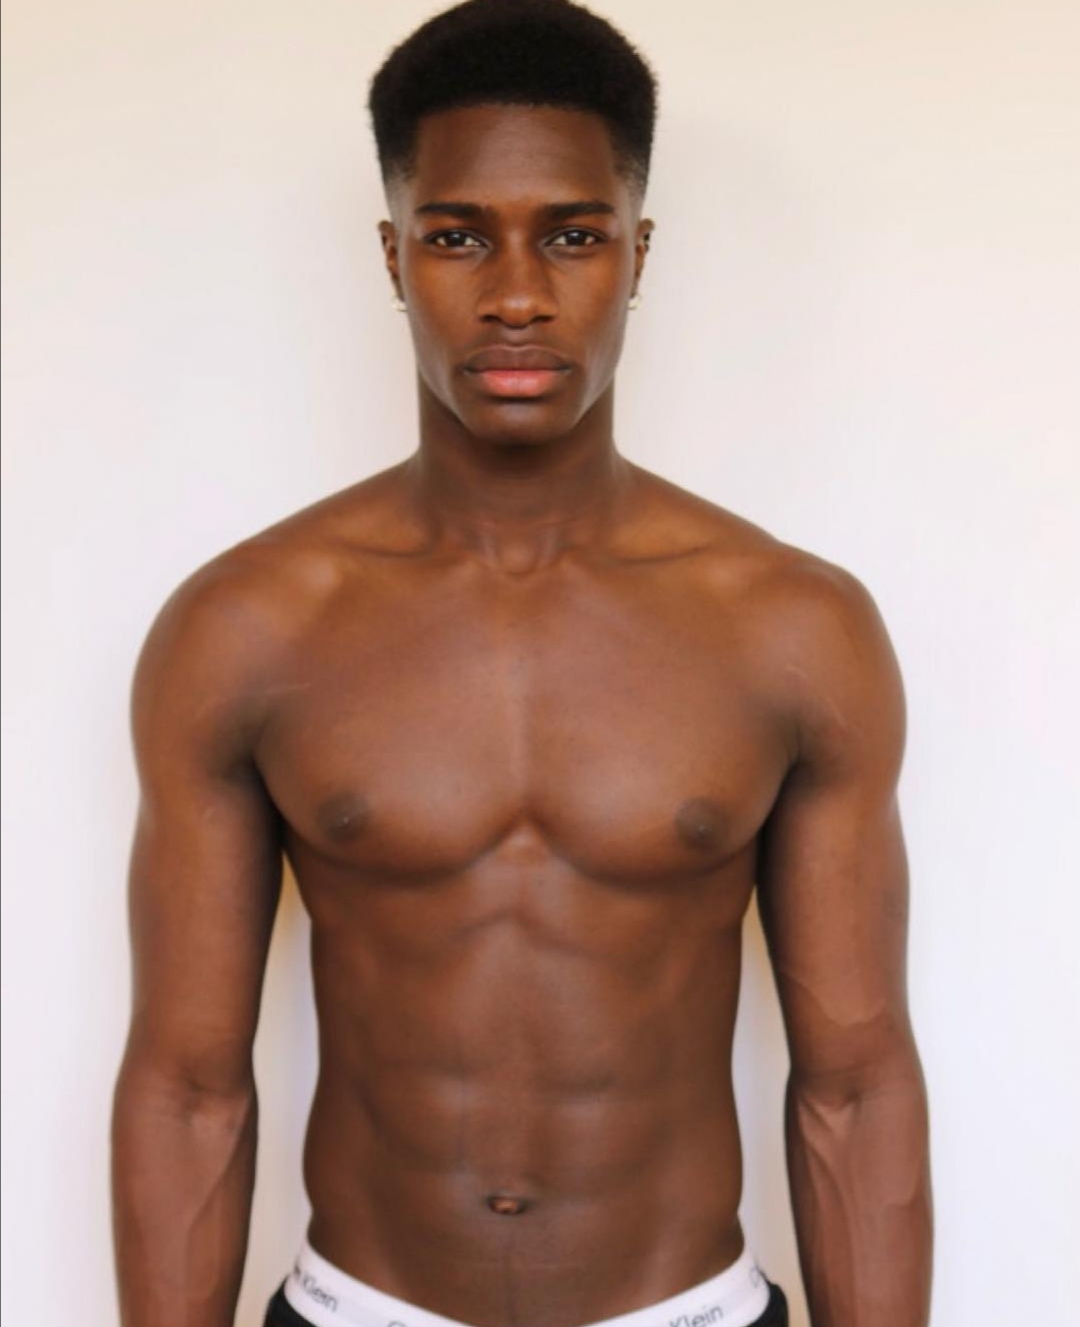 15 HOTTEST MALE MODELS TO FOLLOW ON INSTAGRAM